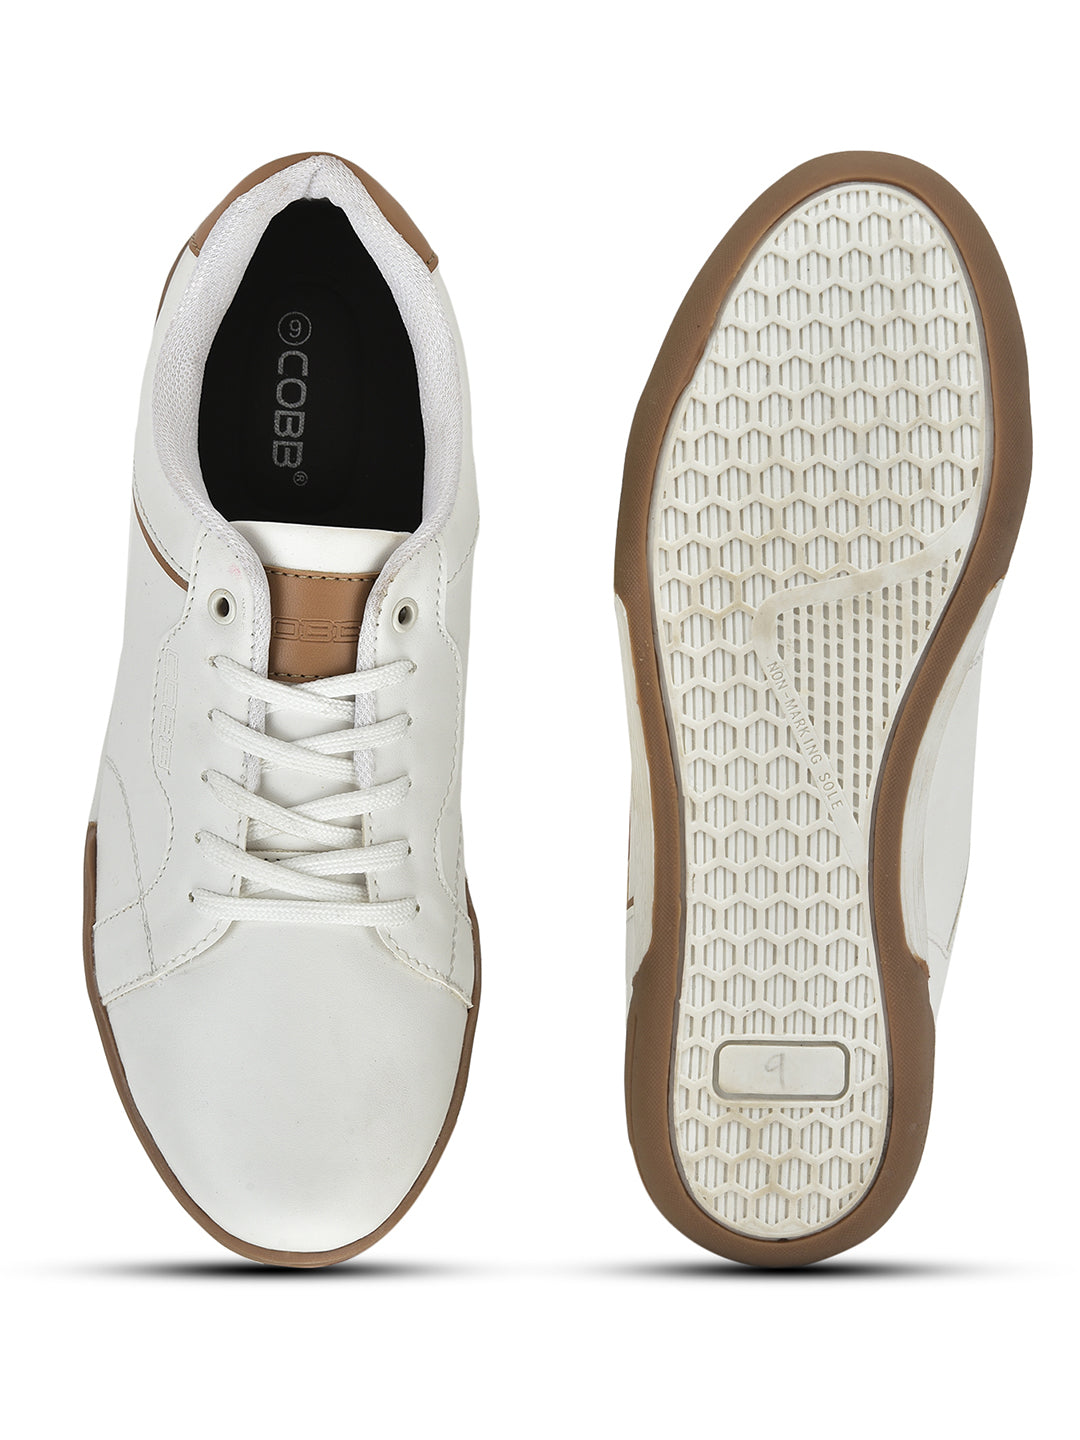 SKECHERS Boys Selectors  Kazox White Casual Shoes Buy SKECHERS Boys  Selectors  Kazox White Casual Shoes Online at Best Price in India  Nykaa